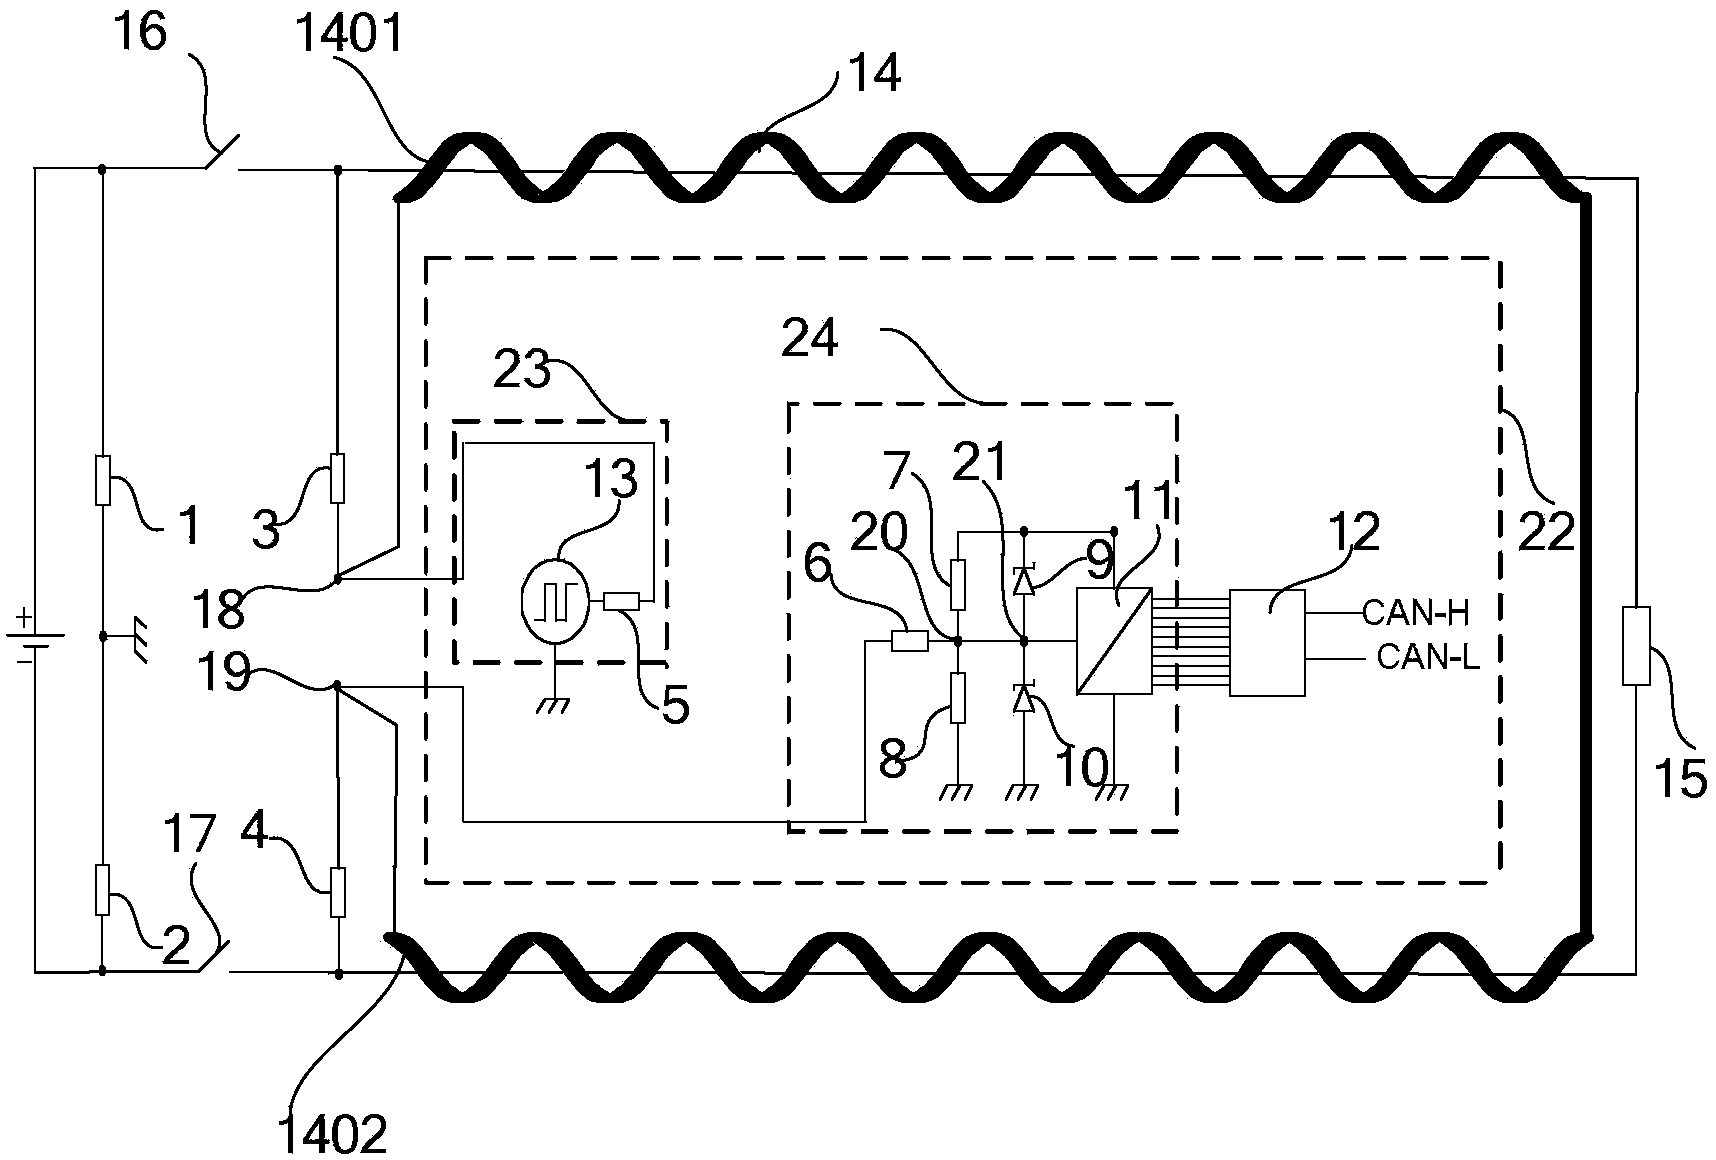 Insulation resistance detecting device for high-voltage circuit